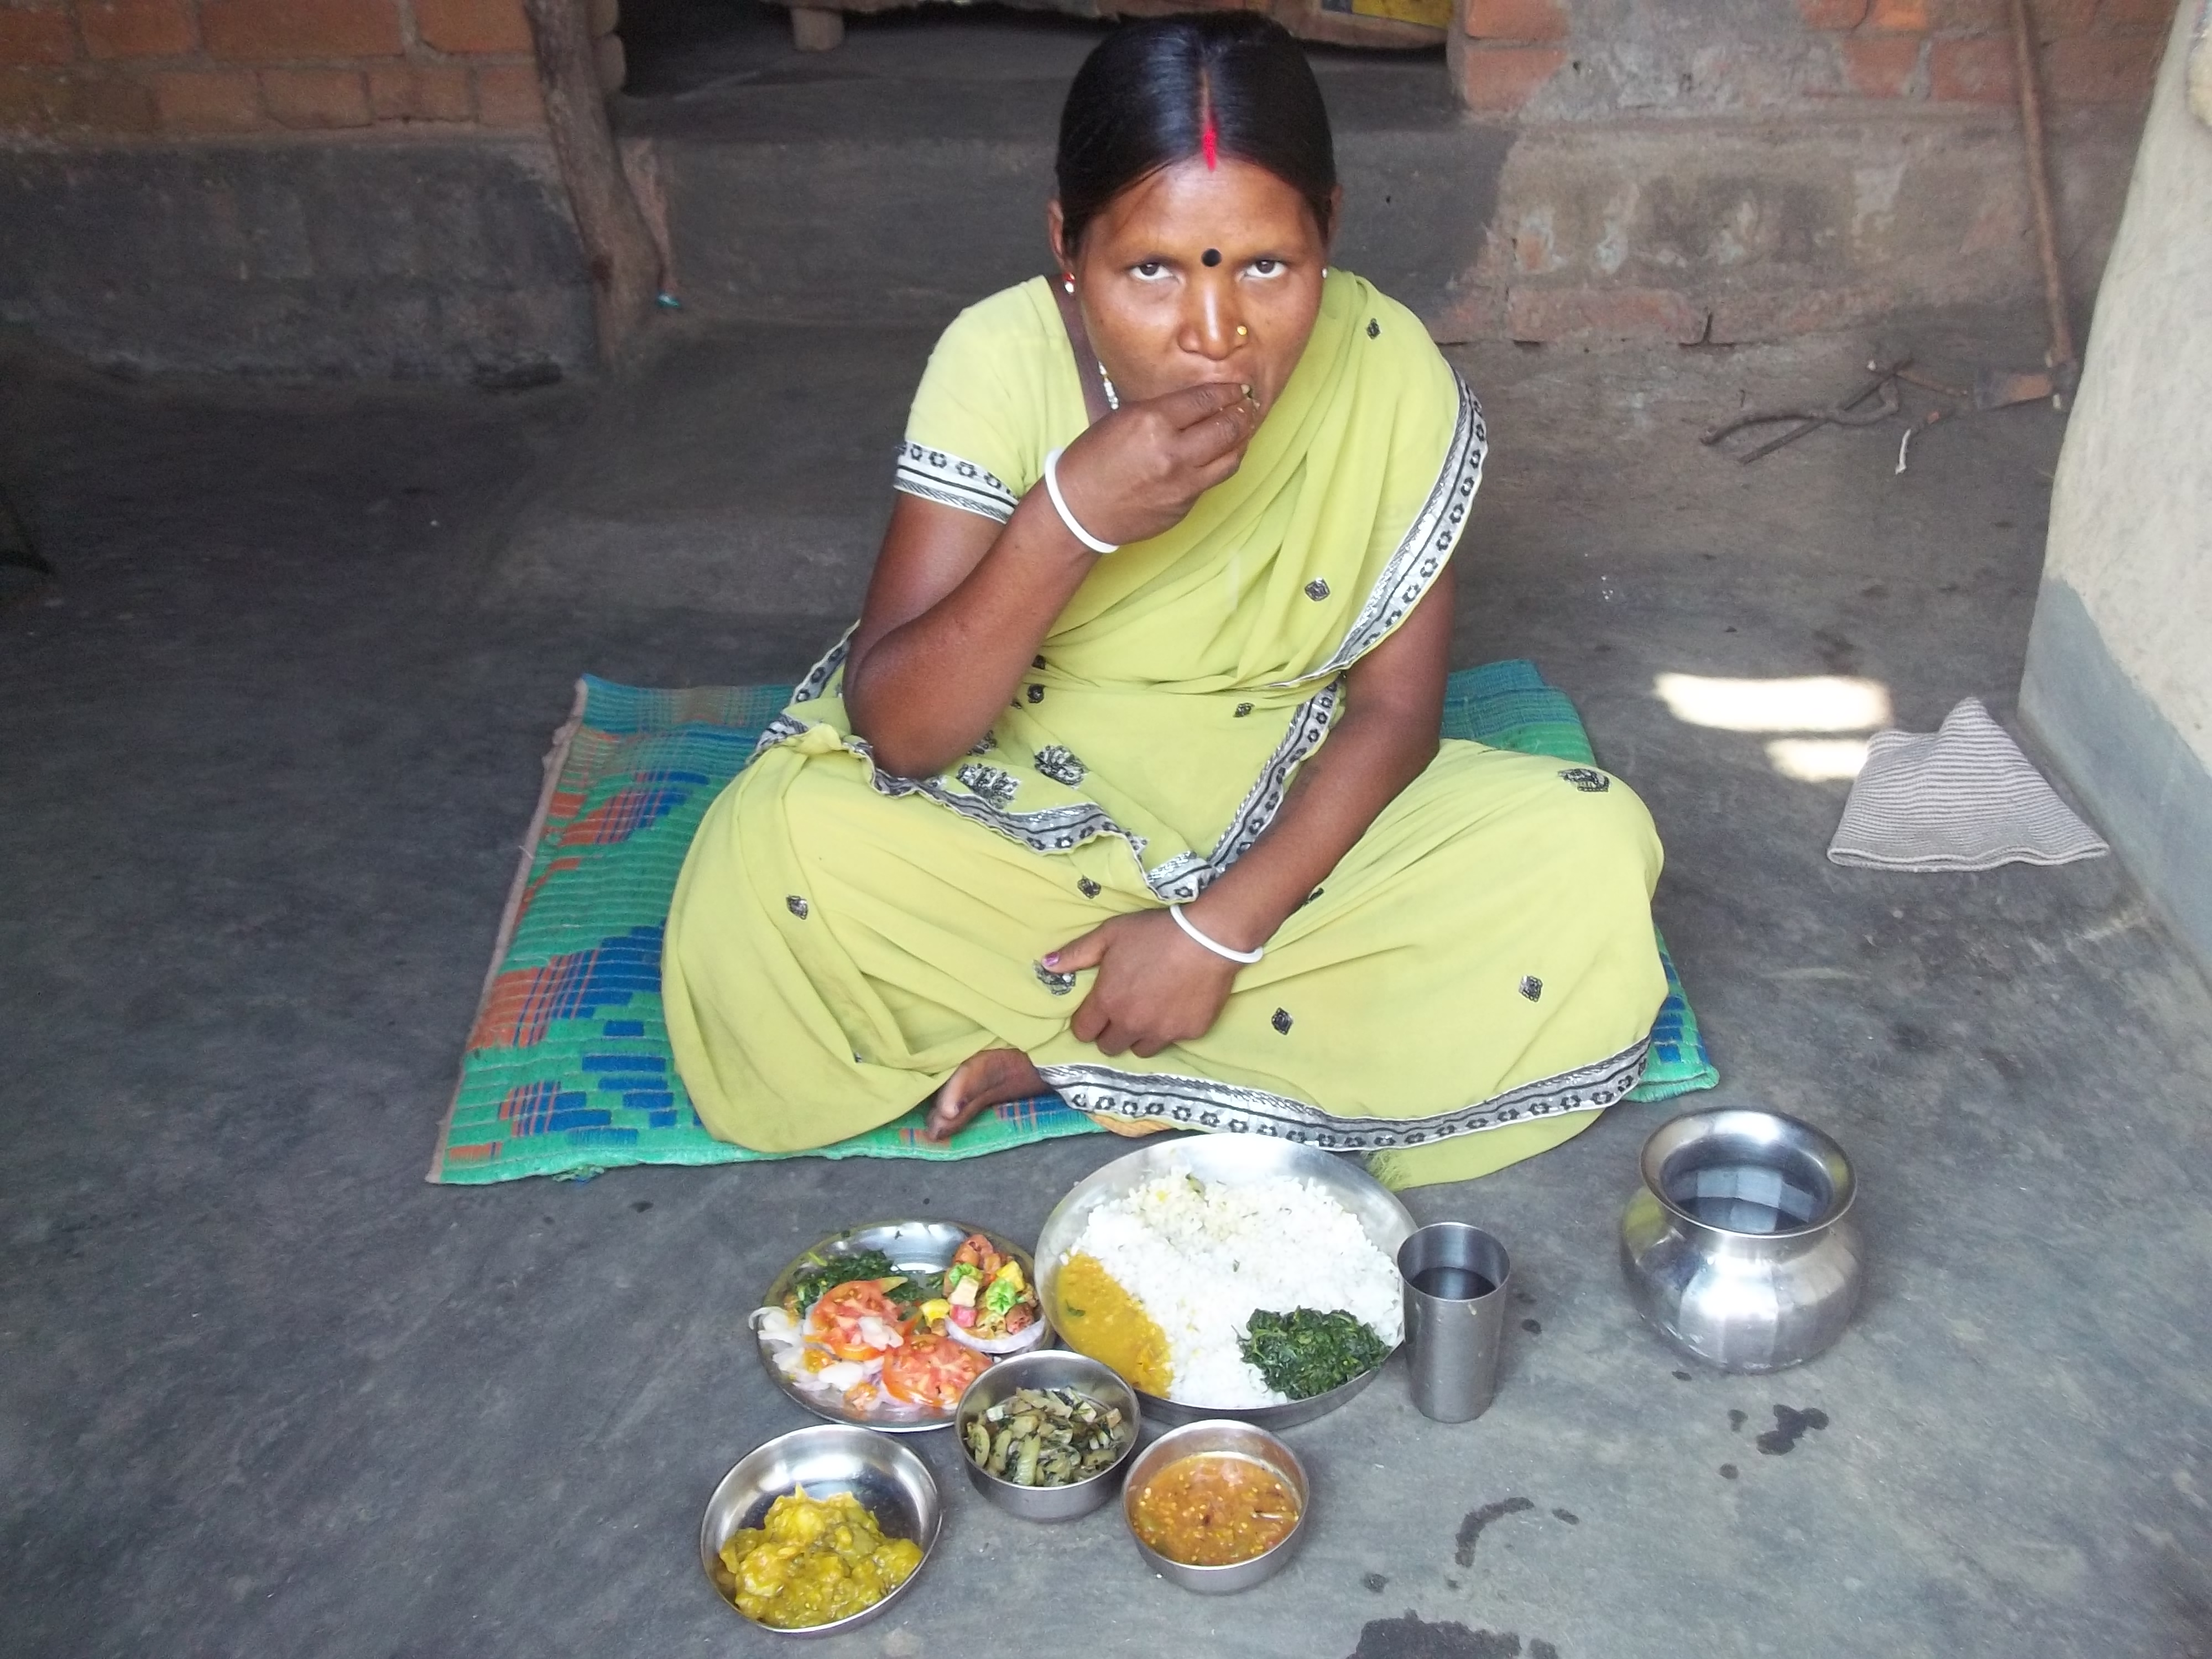 Women across 50 villages in Deoghar district of Jharkhand are cooking up the ‘tiranga bhojan’ or tricolour meal. (Credit: Saadia Azim\WFS)